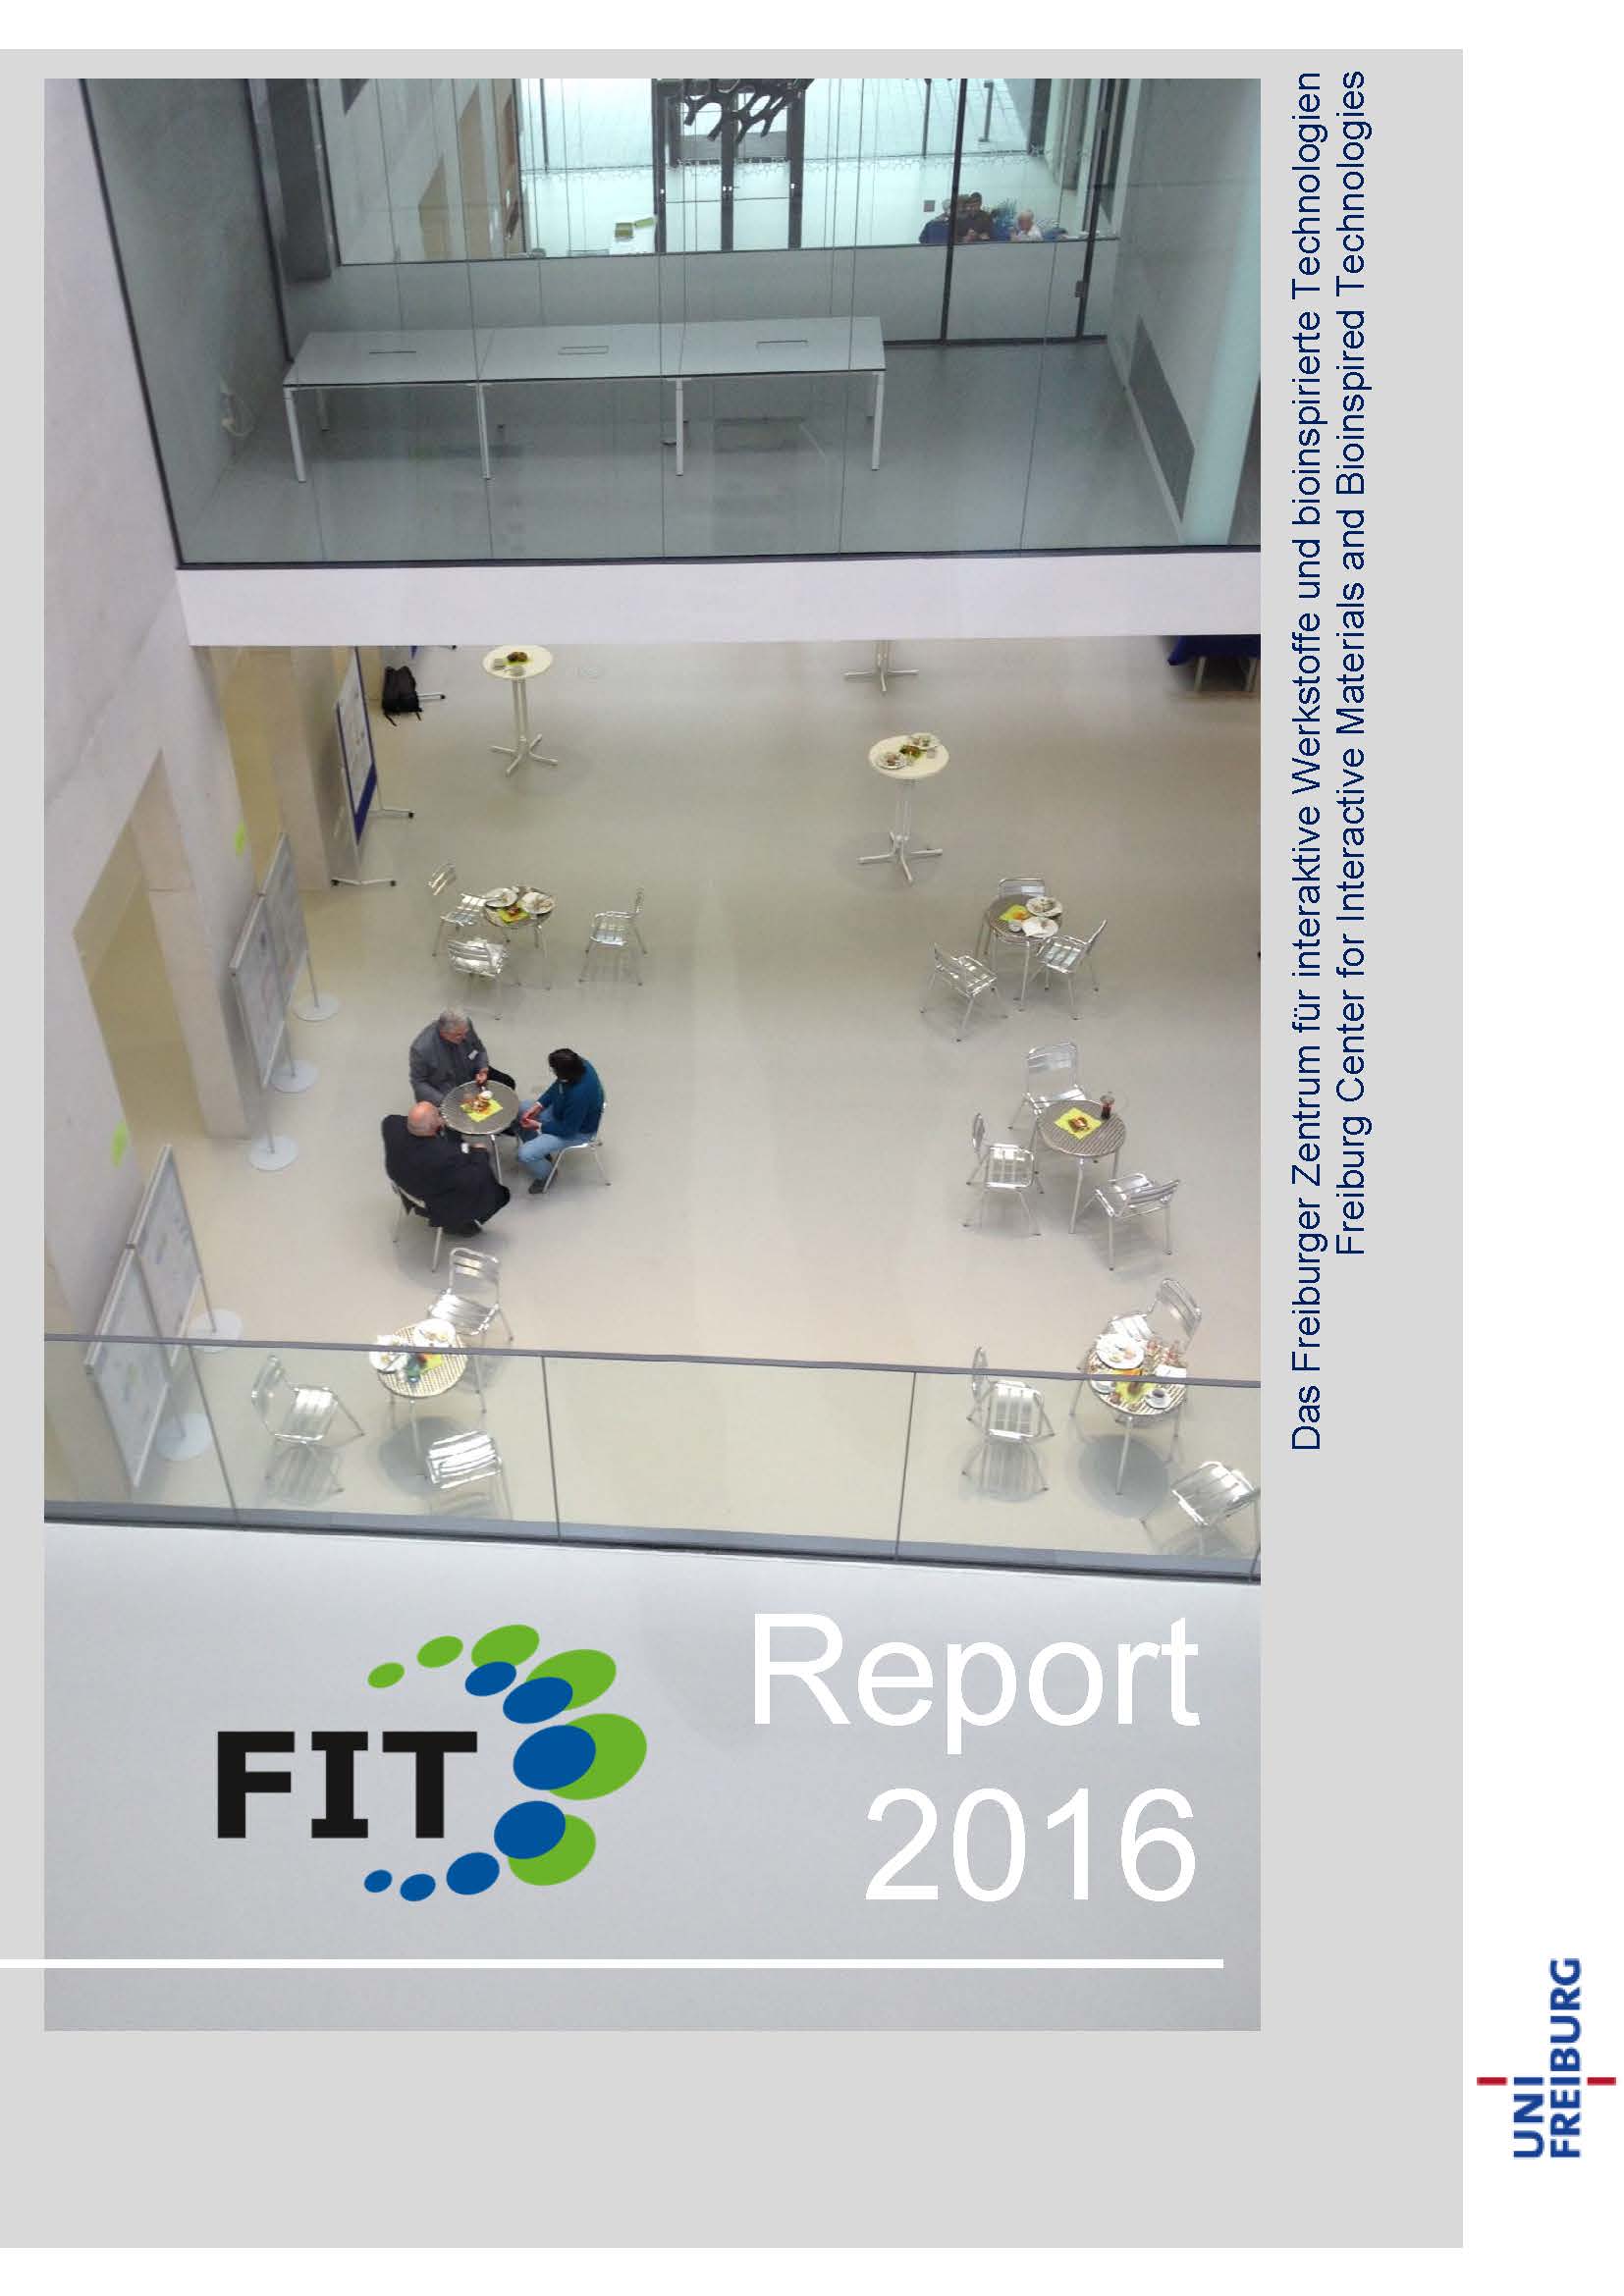 FIT-Report 2016 published